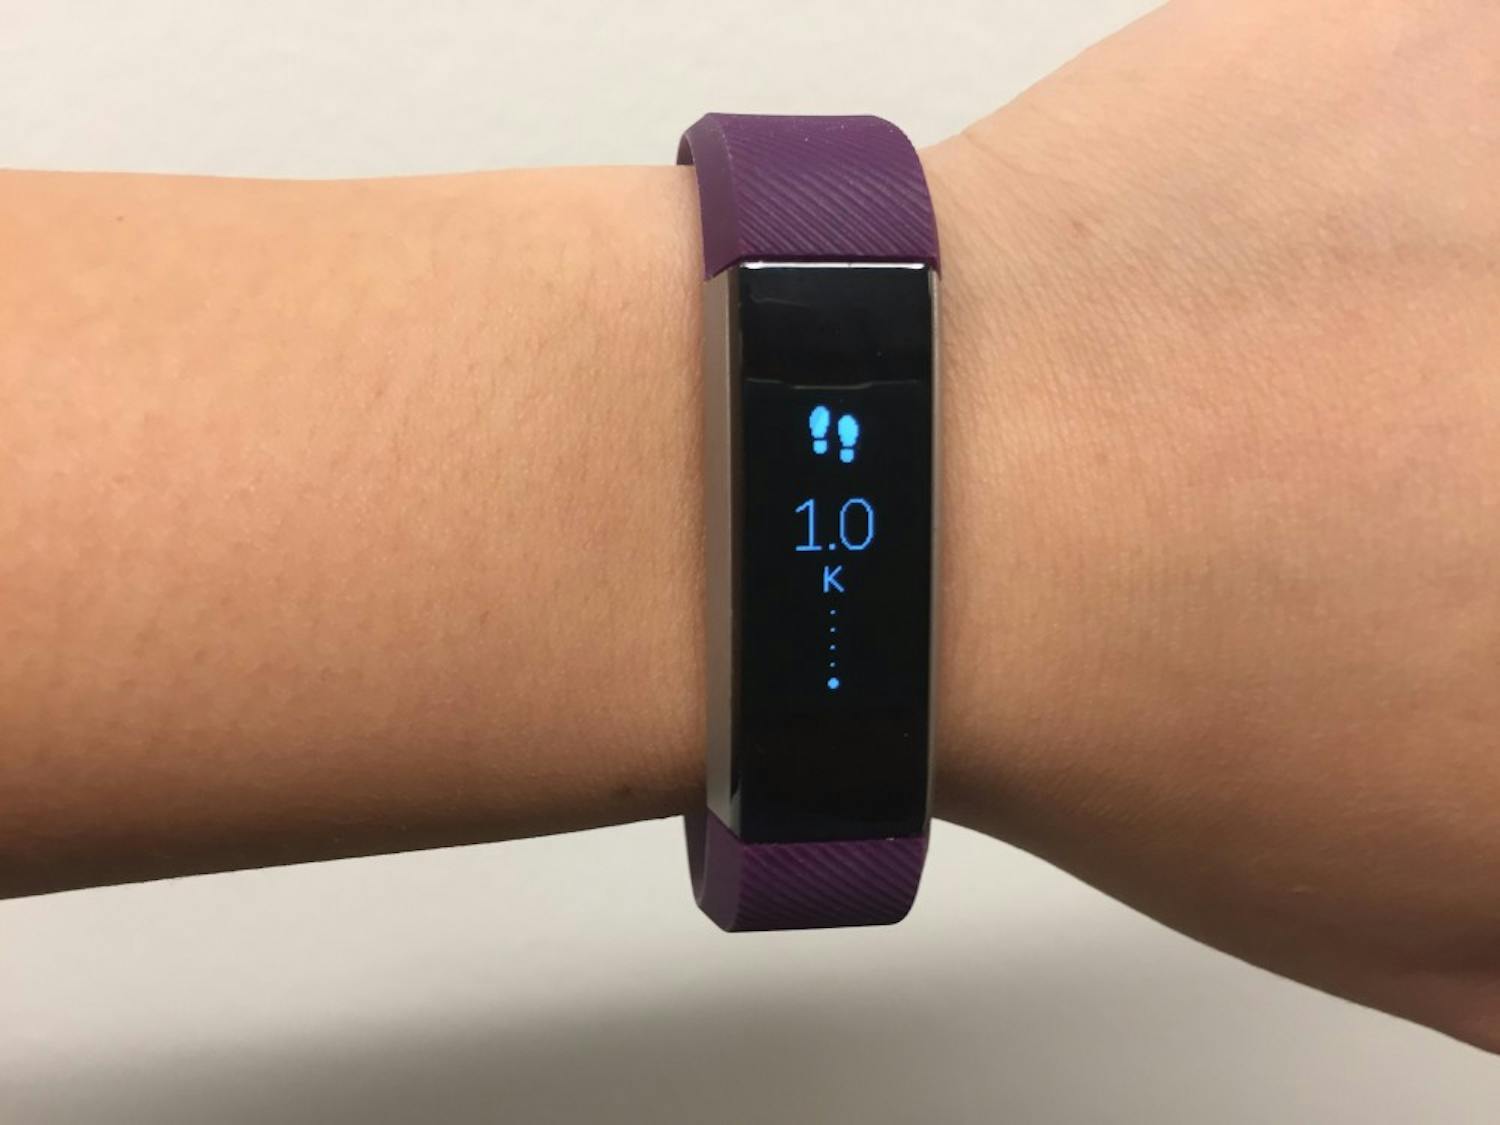 The study found no evidence that using a Fitbit helped people increase the number of steps they walked.